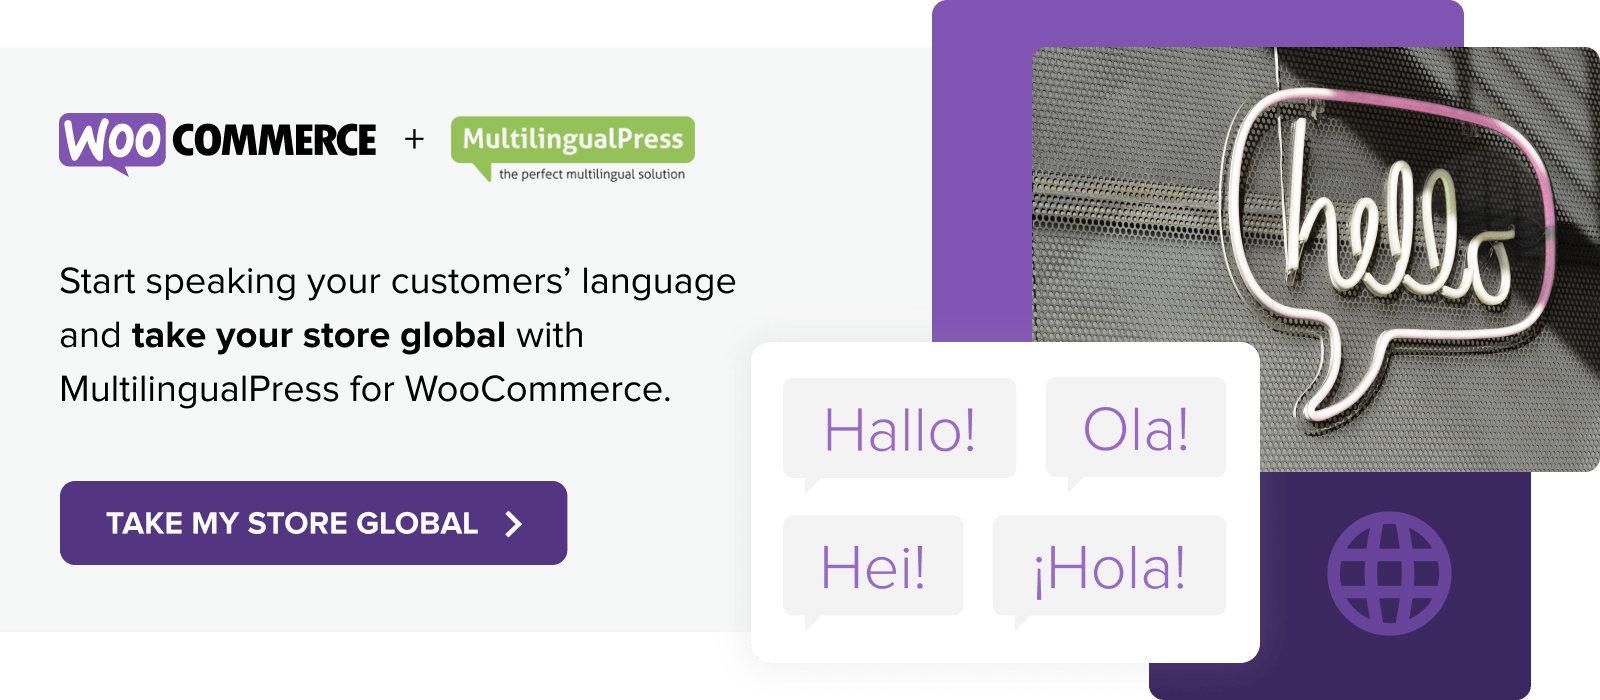 Take your store global with MultilingualPress